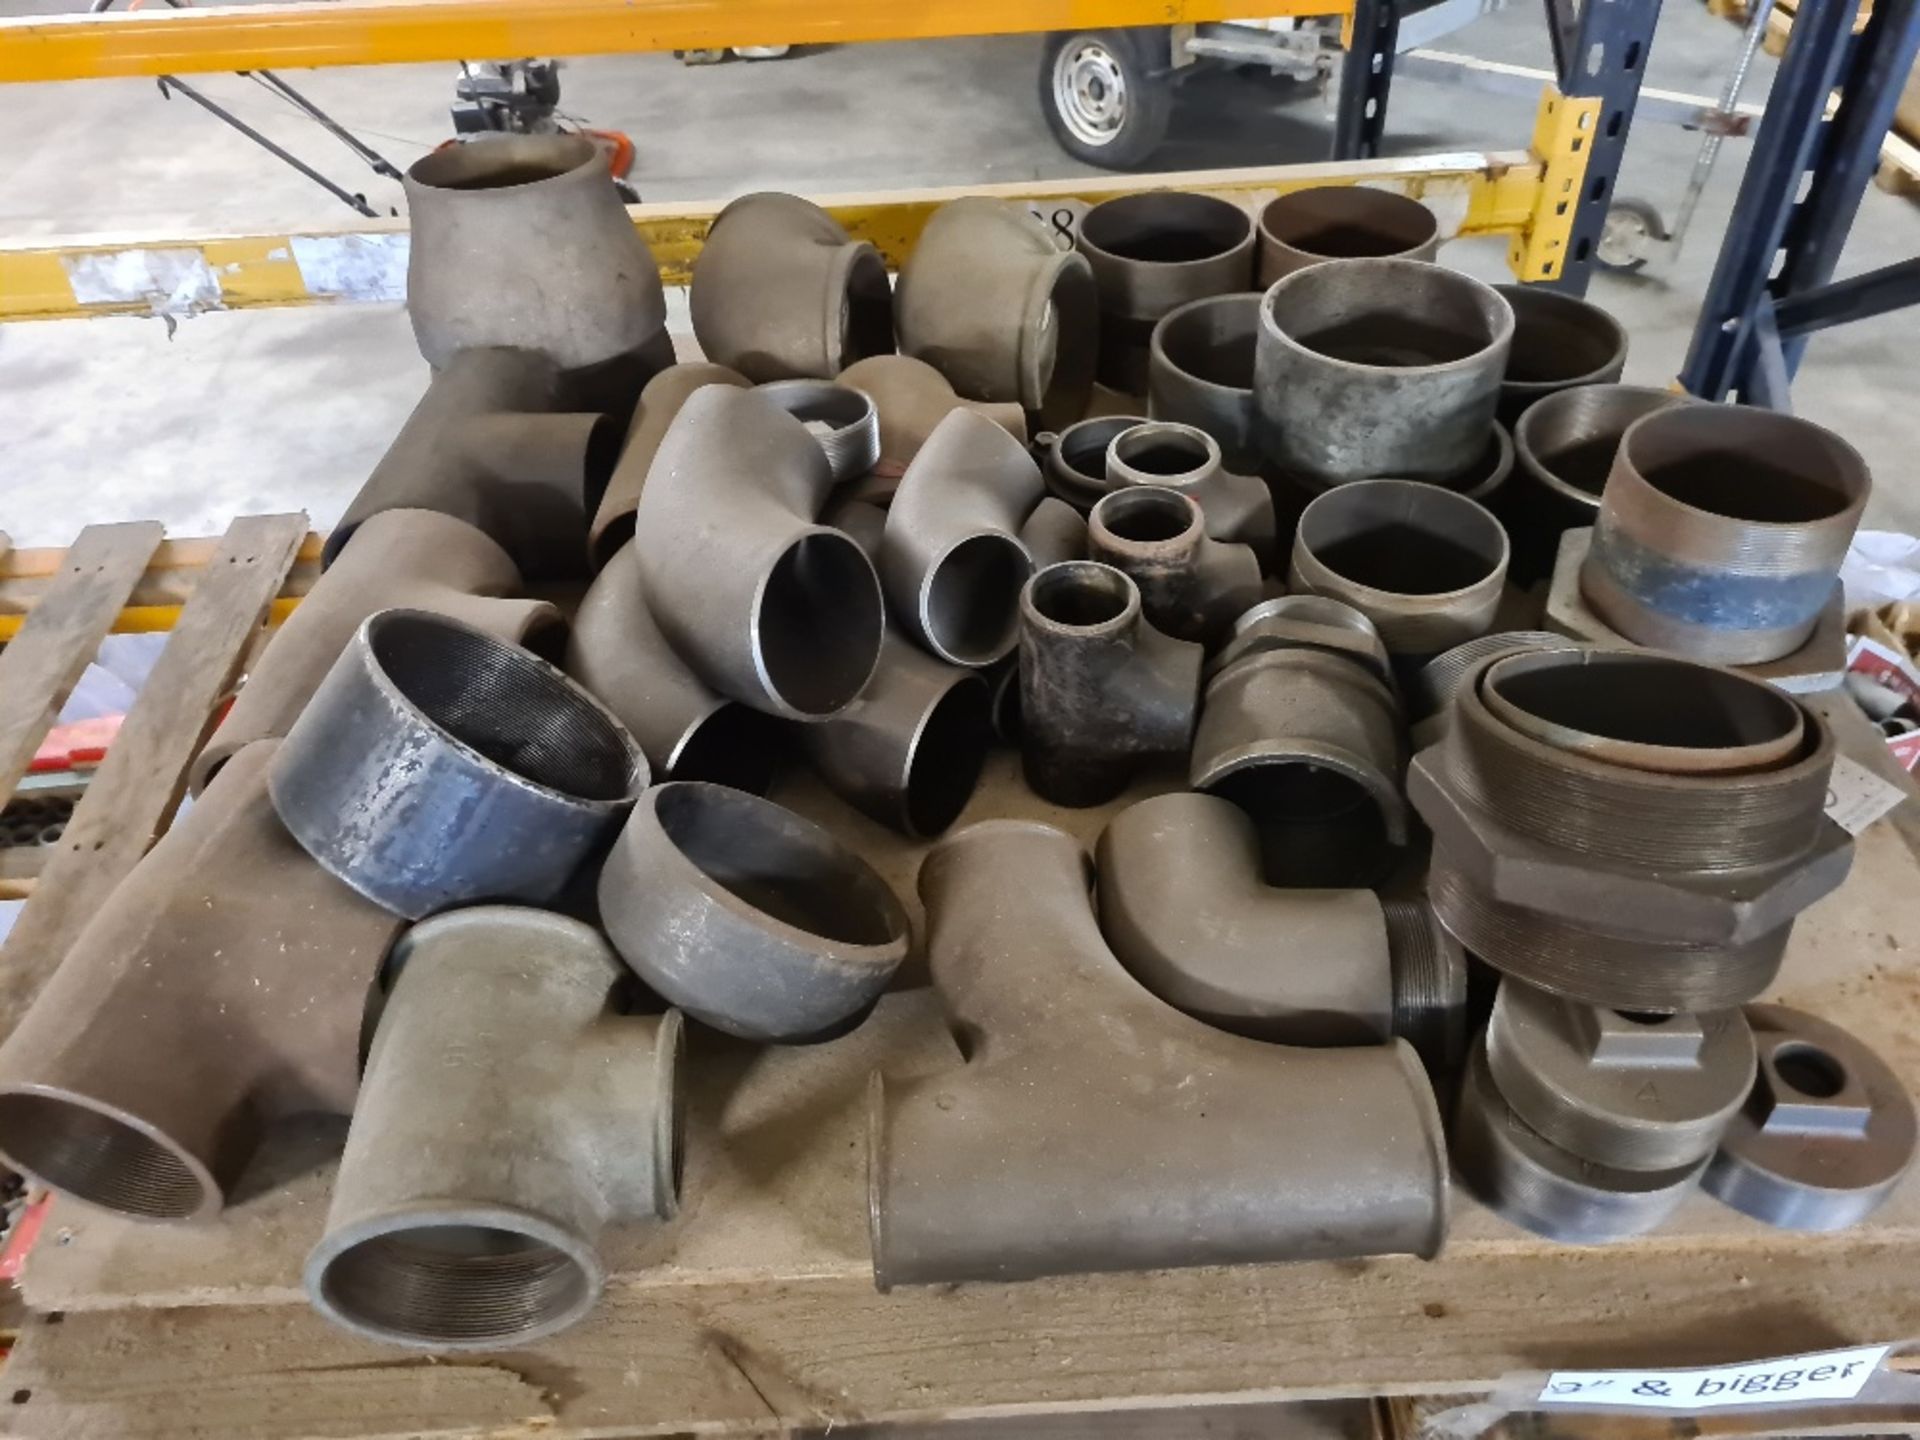 Pallet of malleable pipe fittings 3" and larger.